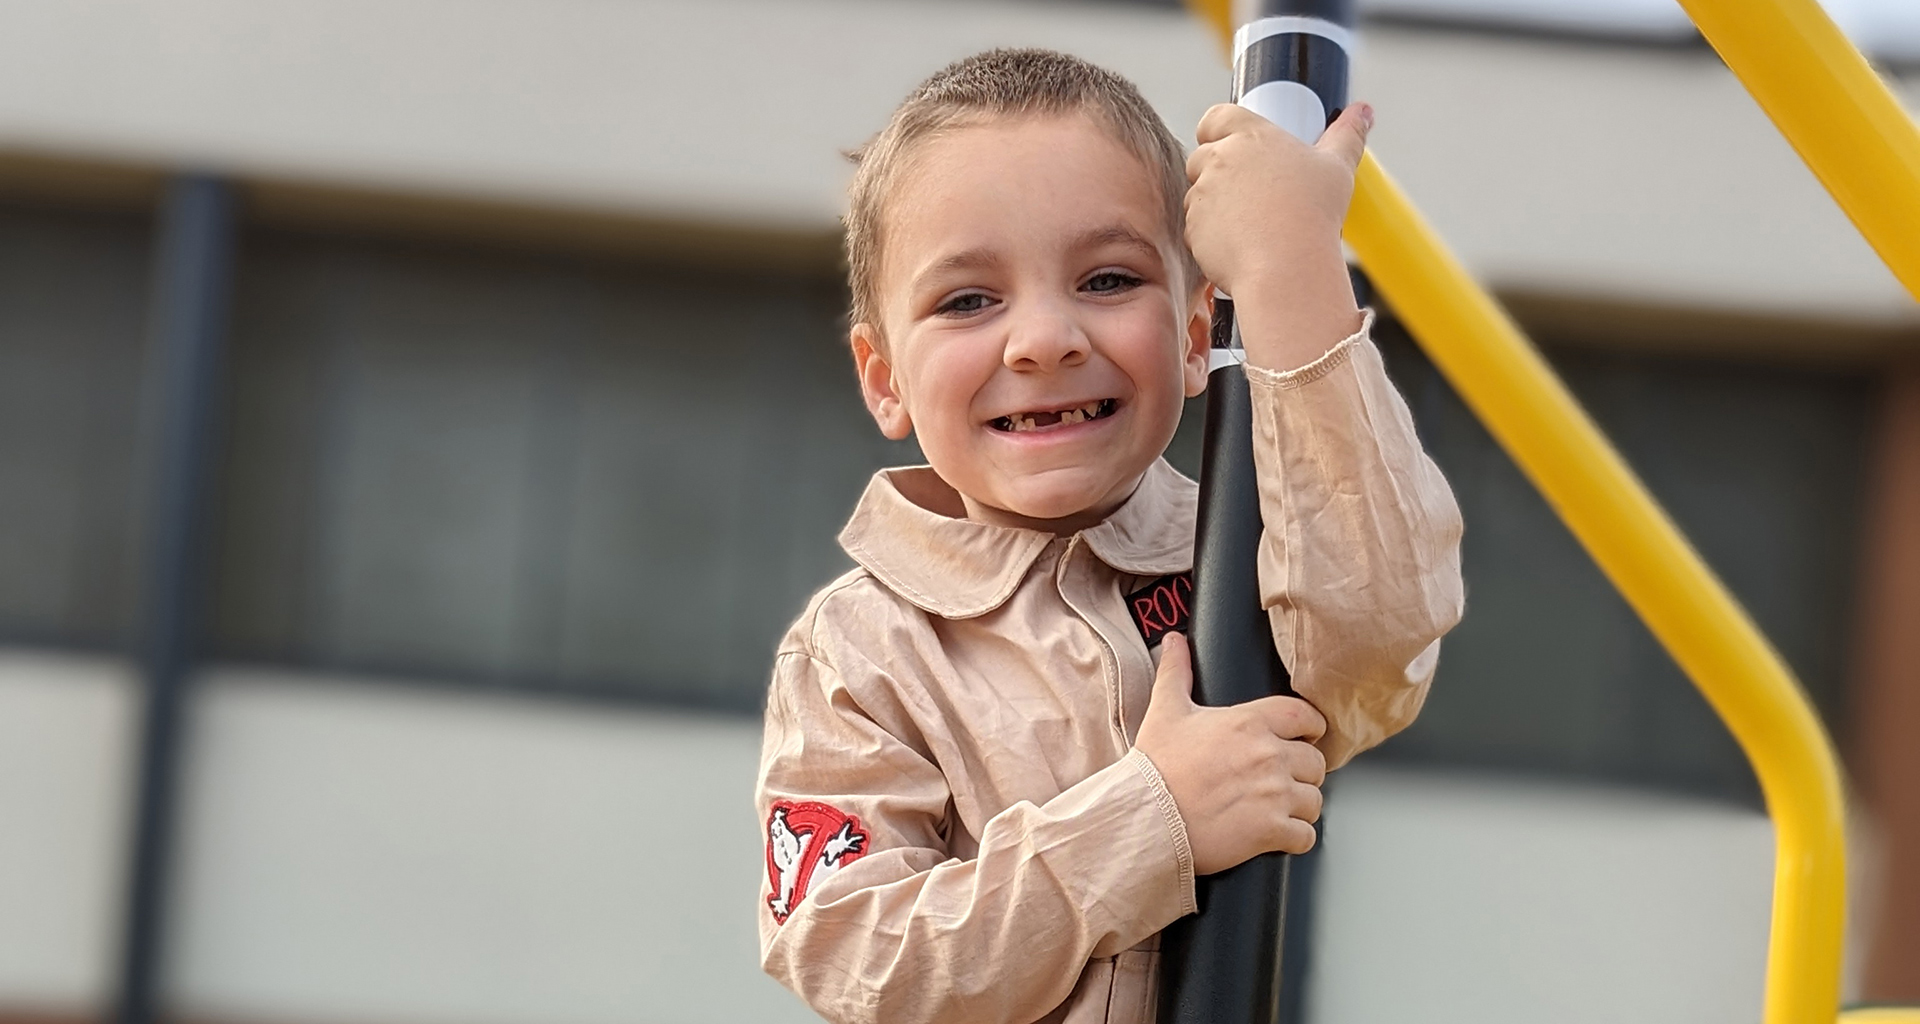 Male student on playground equipment smiles for the camera.